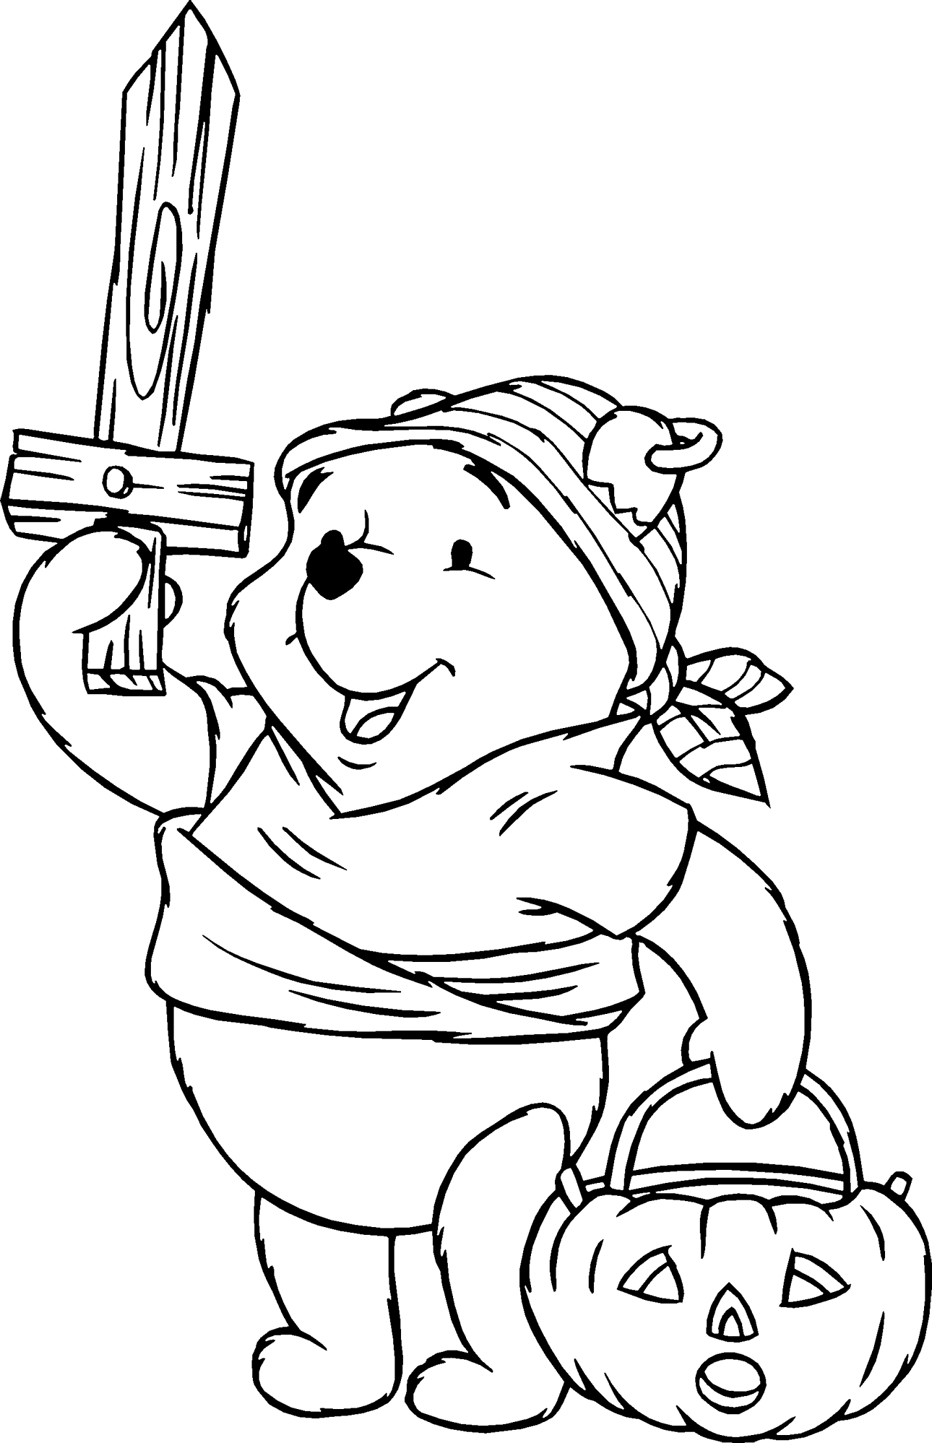 Pooh Bear Coloring Pages 8